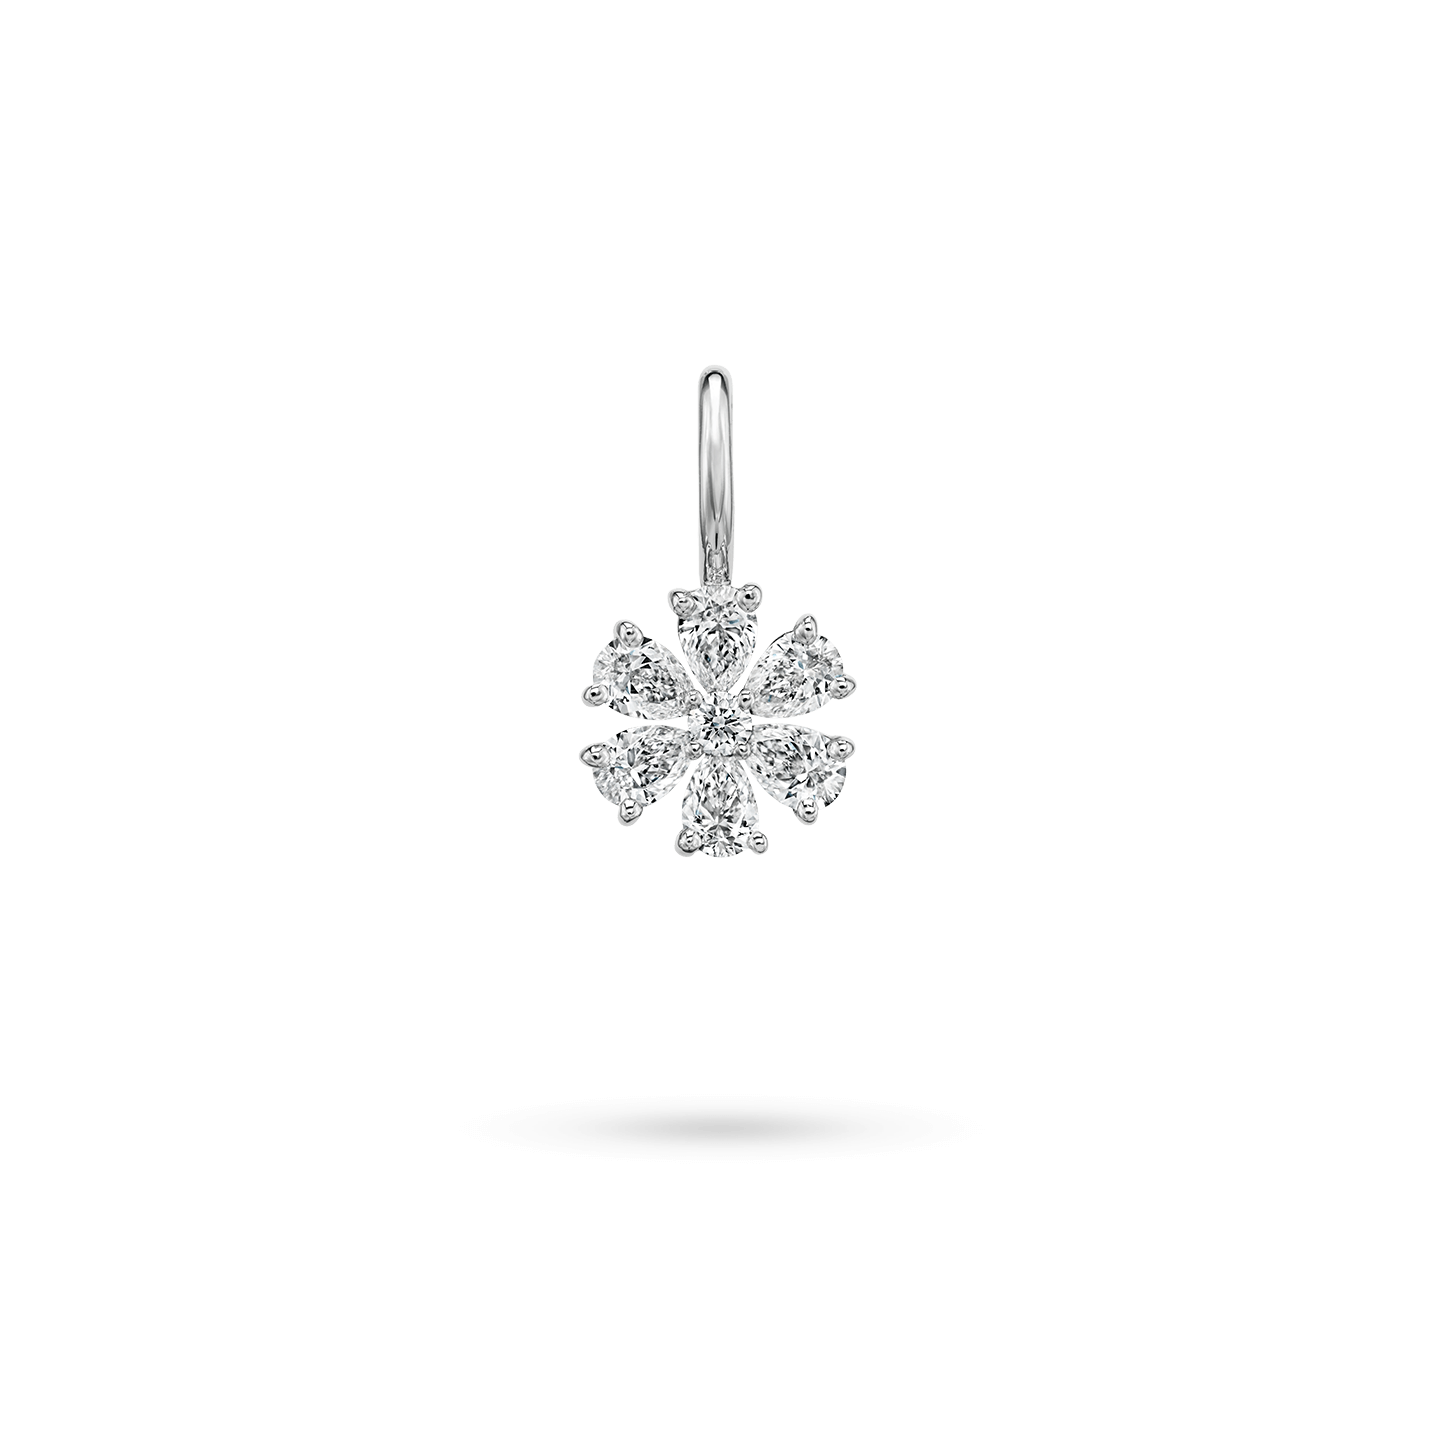 Forget-Me-Not Diamond Charm, Product Image 1